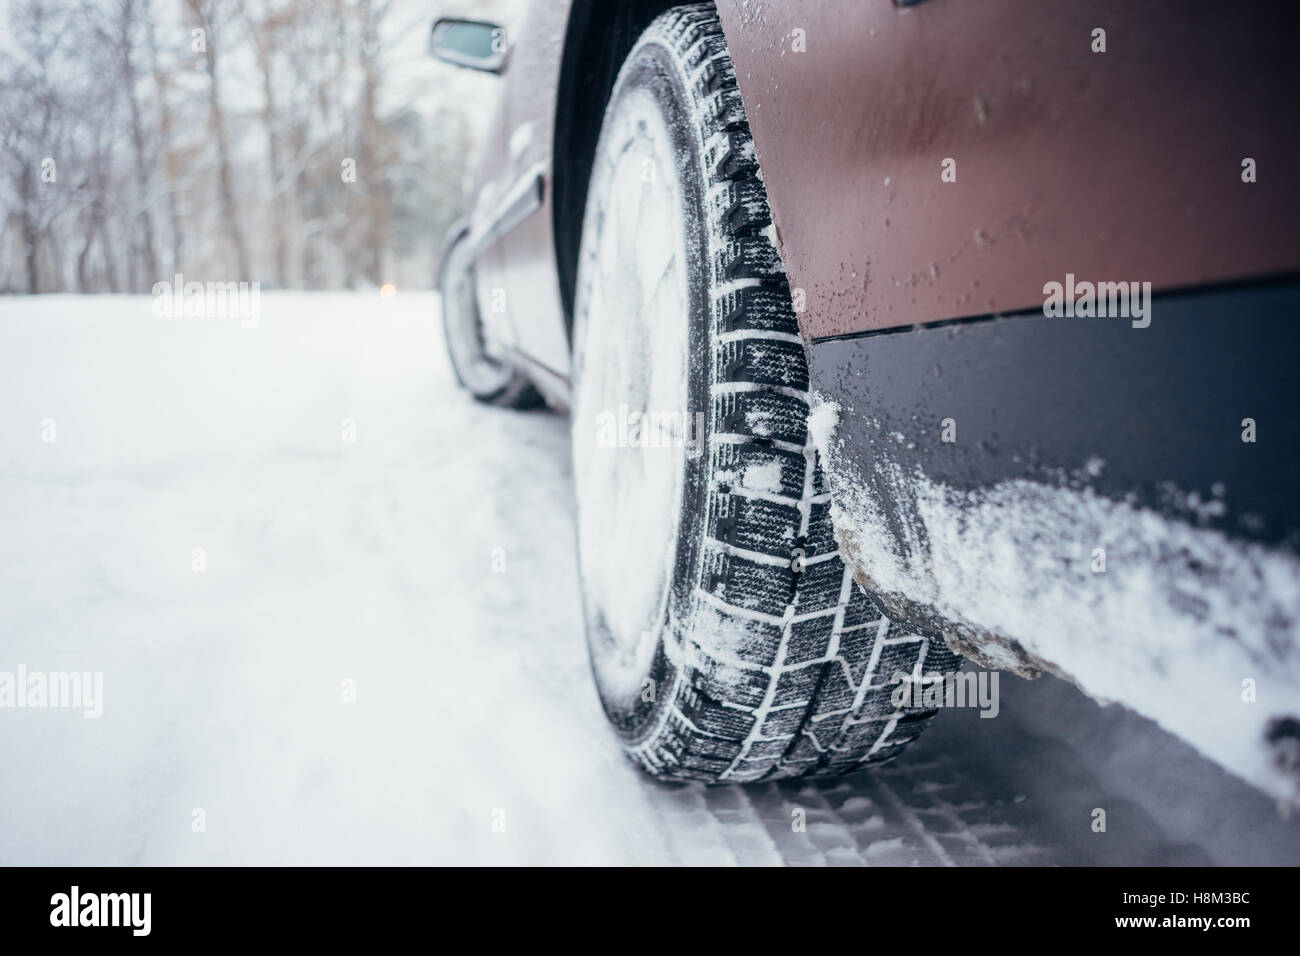 Car with winter tire on snowy road, defocused image Stock Photo